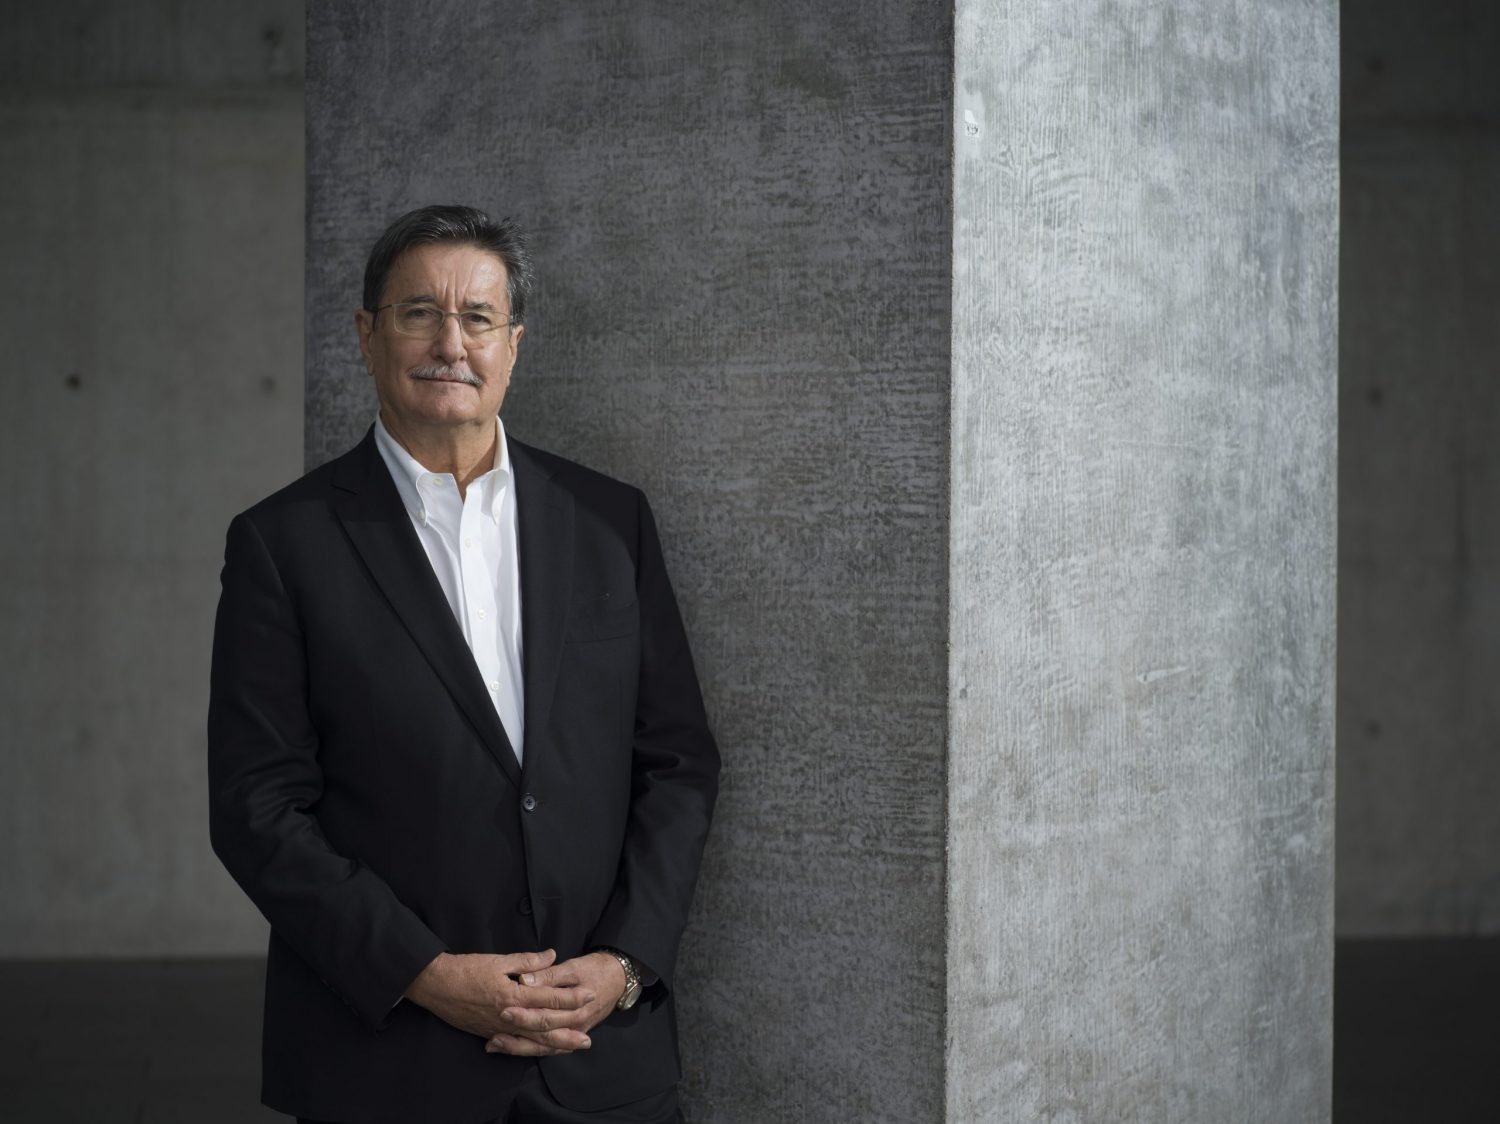 ICC Sydney CEO Geoff Donaghy to step down after 30 years of Venue Management. Photo: ICC Sydney